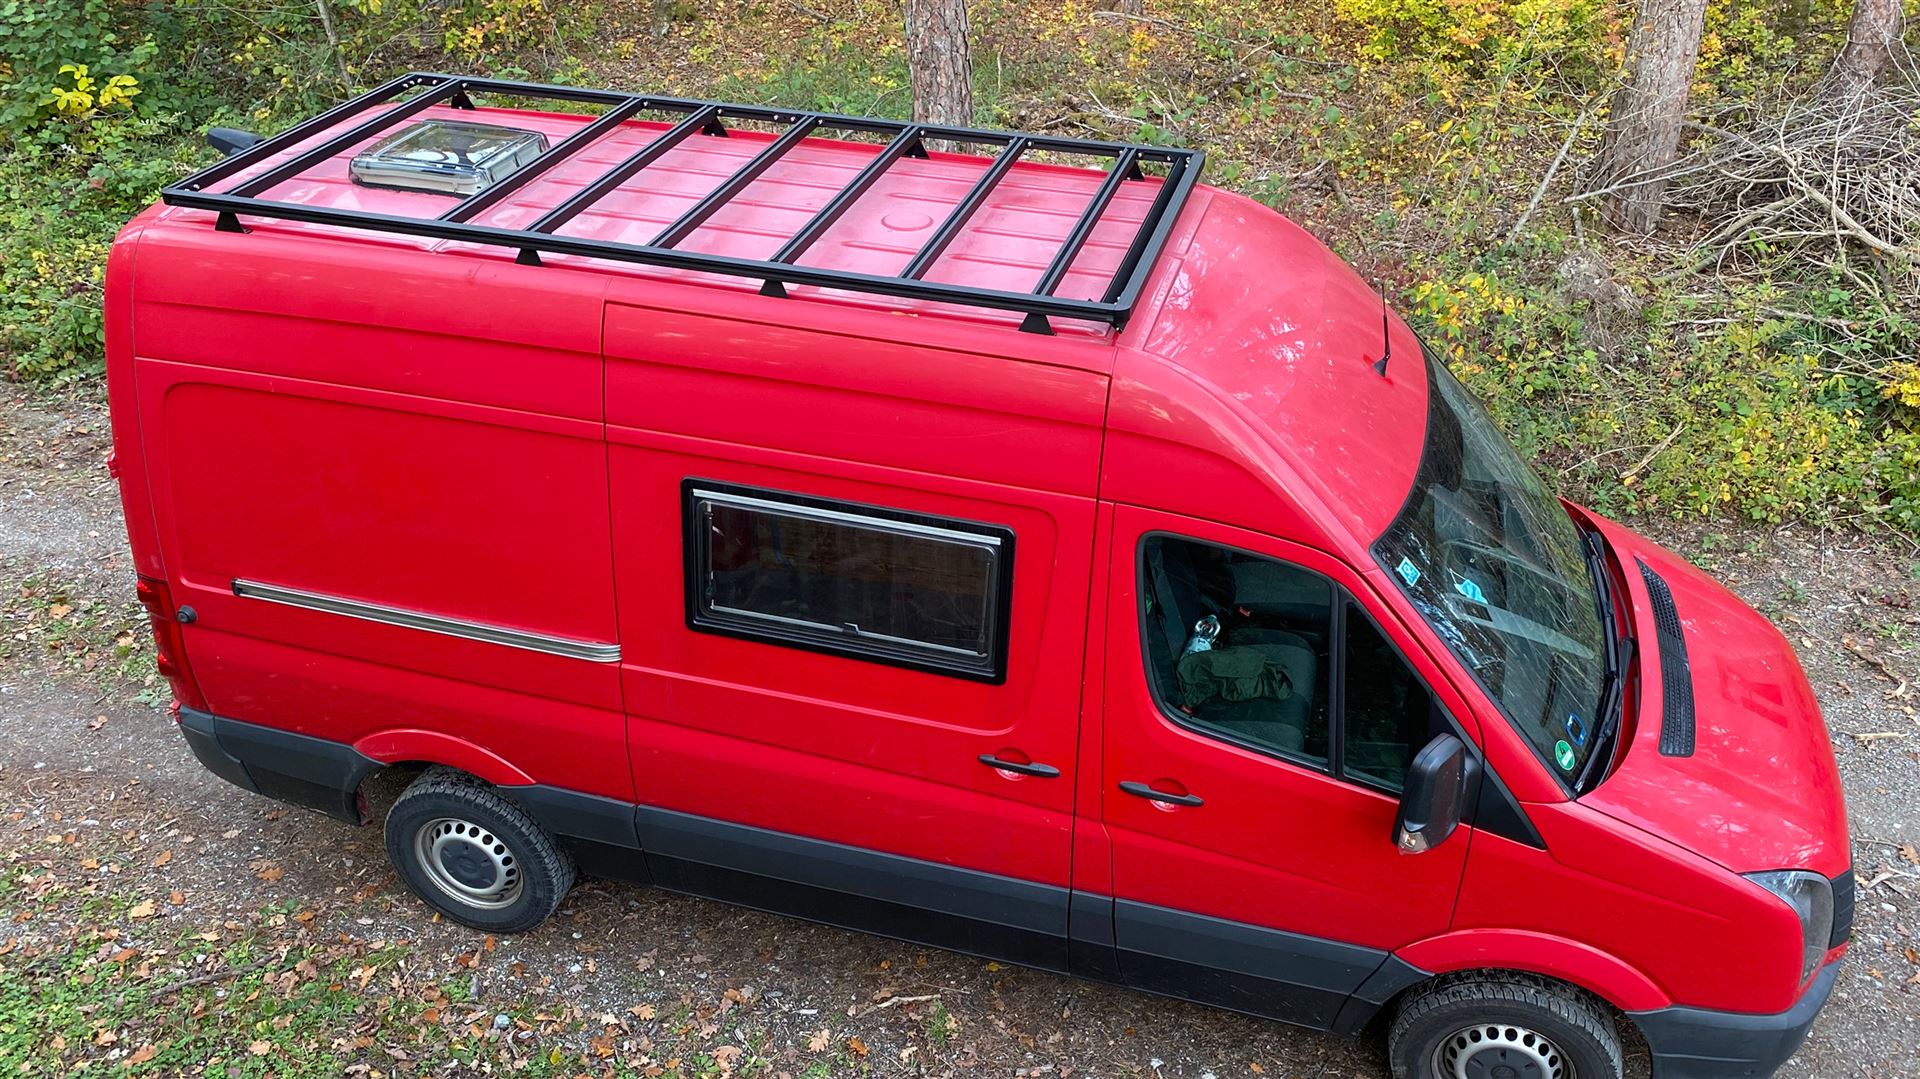 https://www.alu-dachtraeger.de/images/pictures/vw-crafter_dachtraeger.jpg